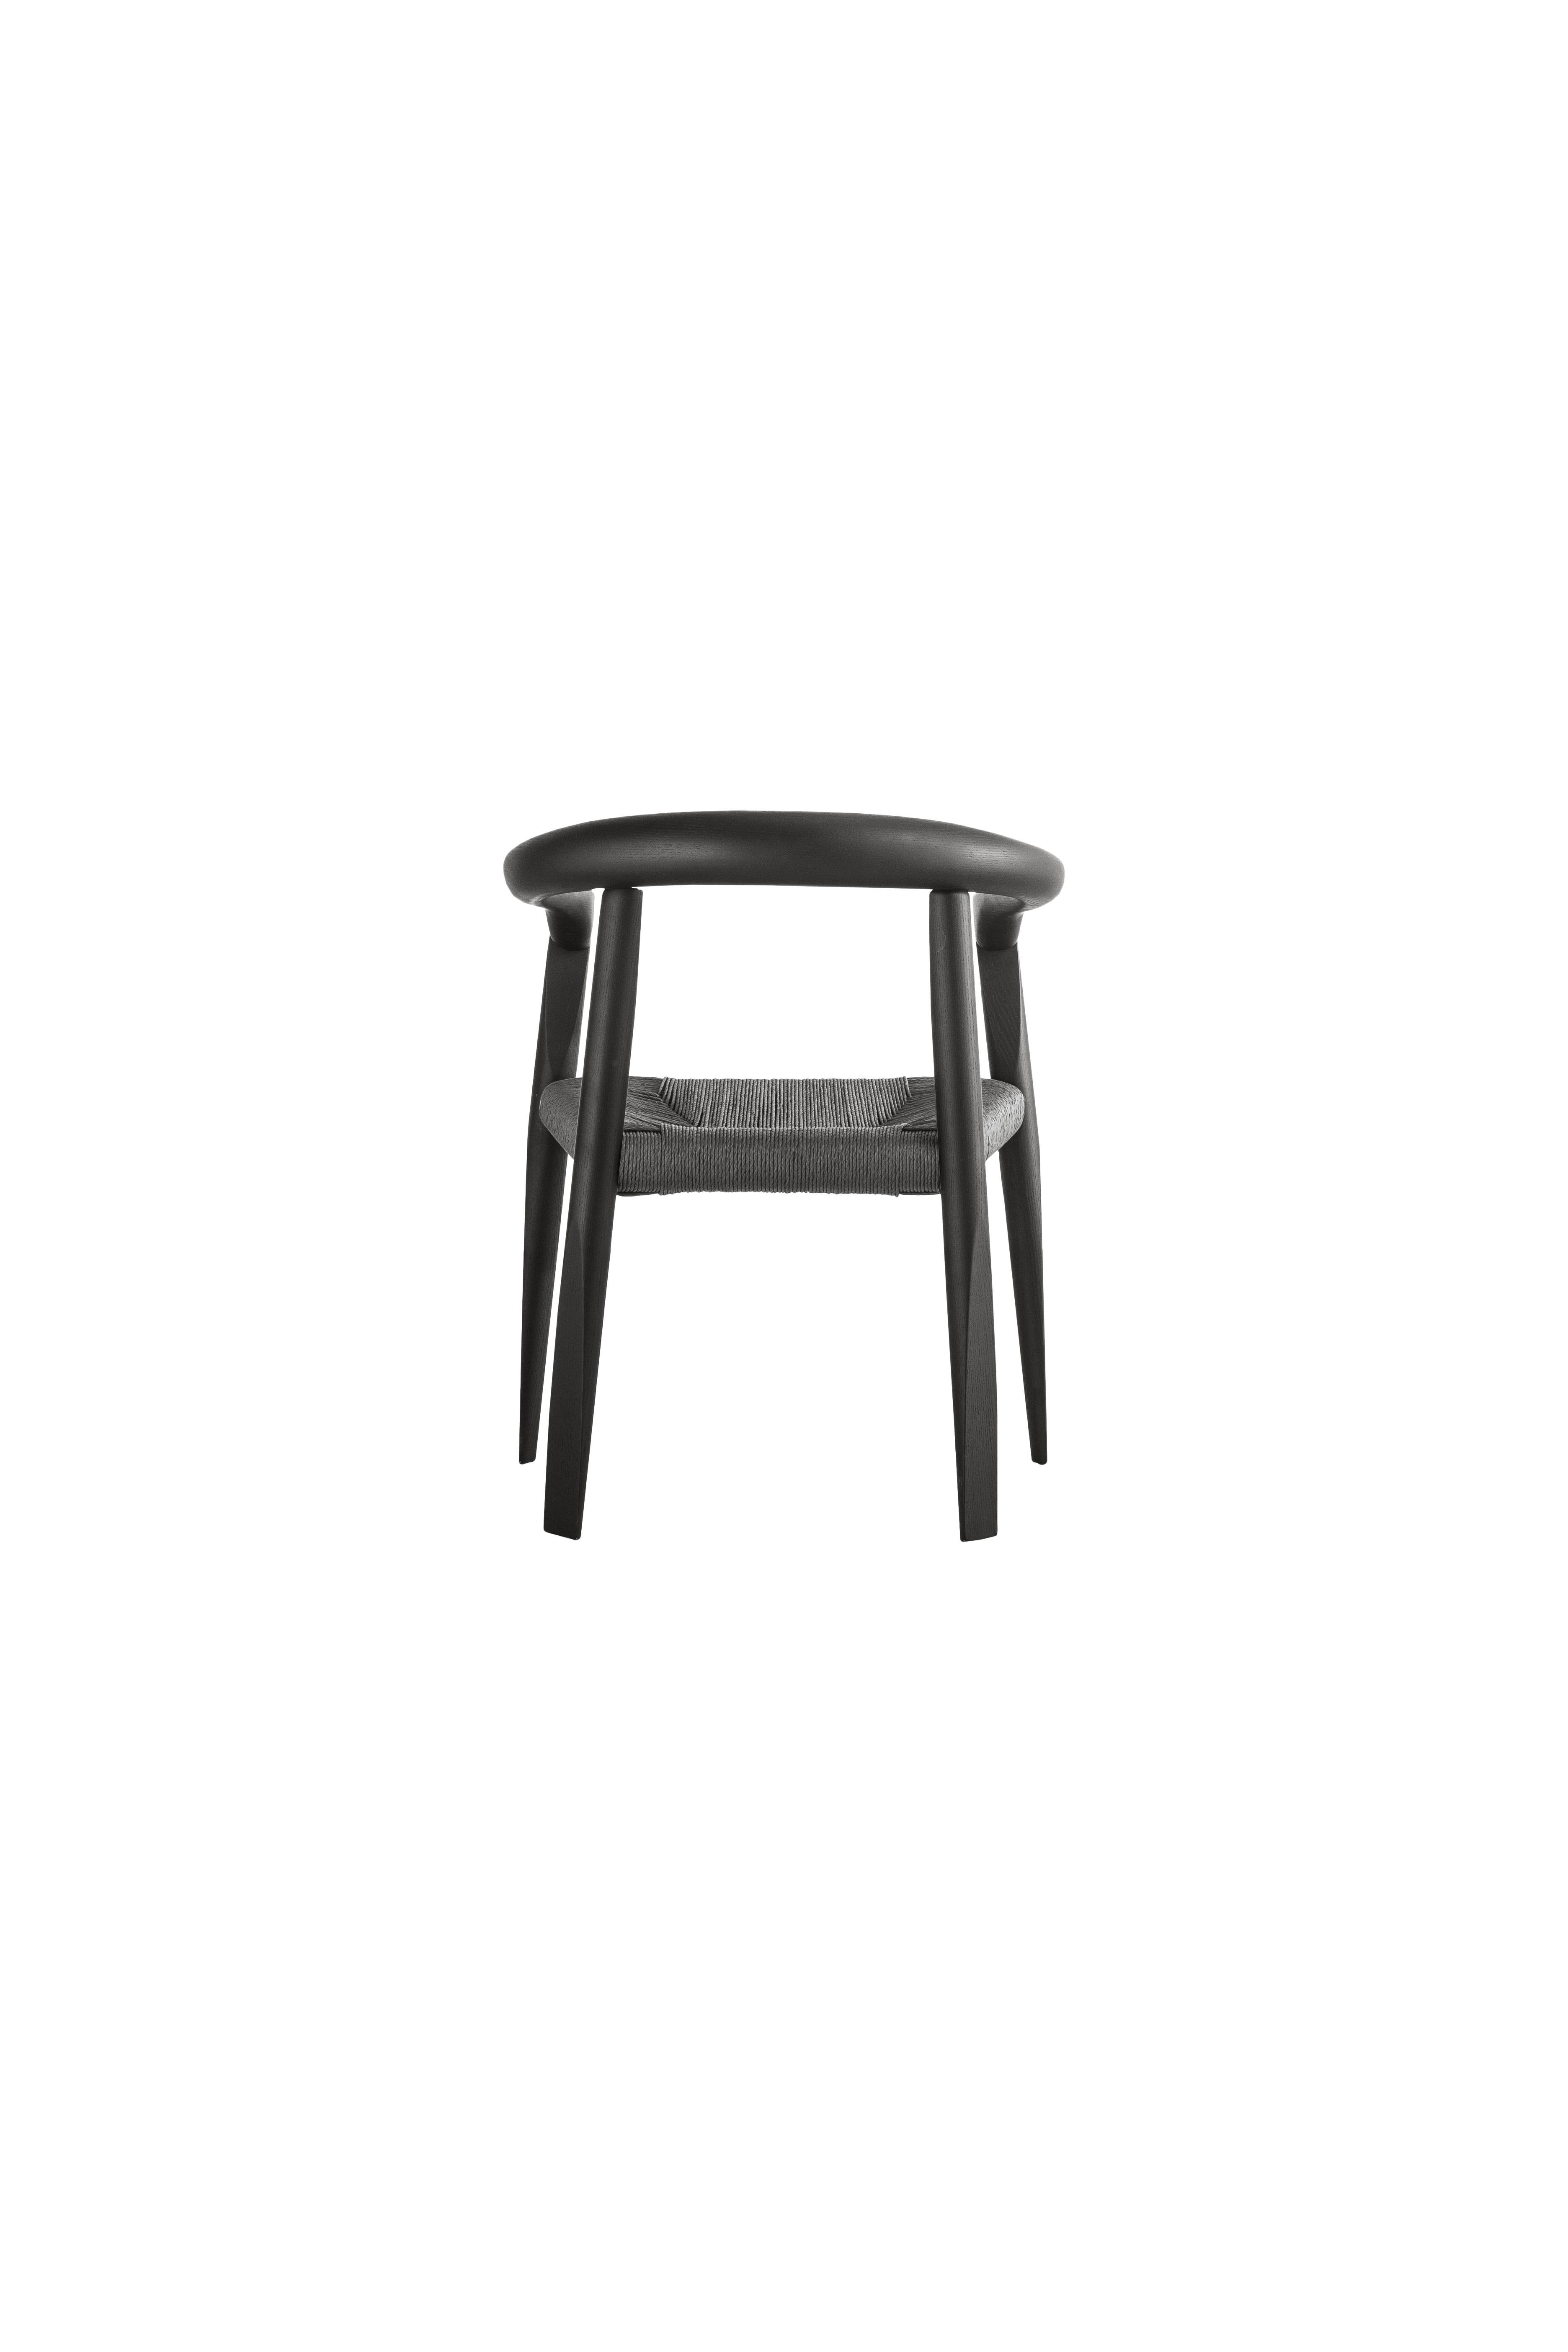 For Sale: Gray (GR_grey) Woven Black Ash Wood Dining Chair Molteni&C by Tobia Scarpa - made in Italy 3